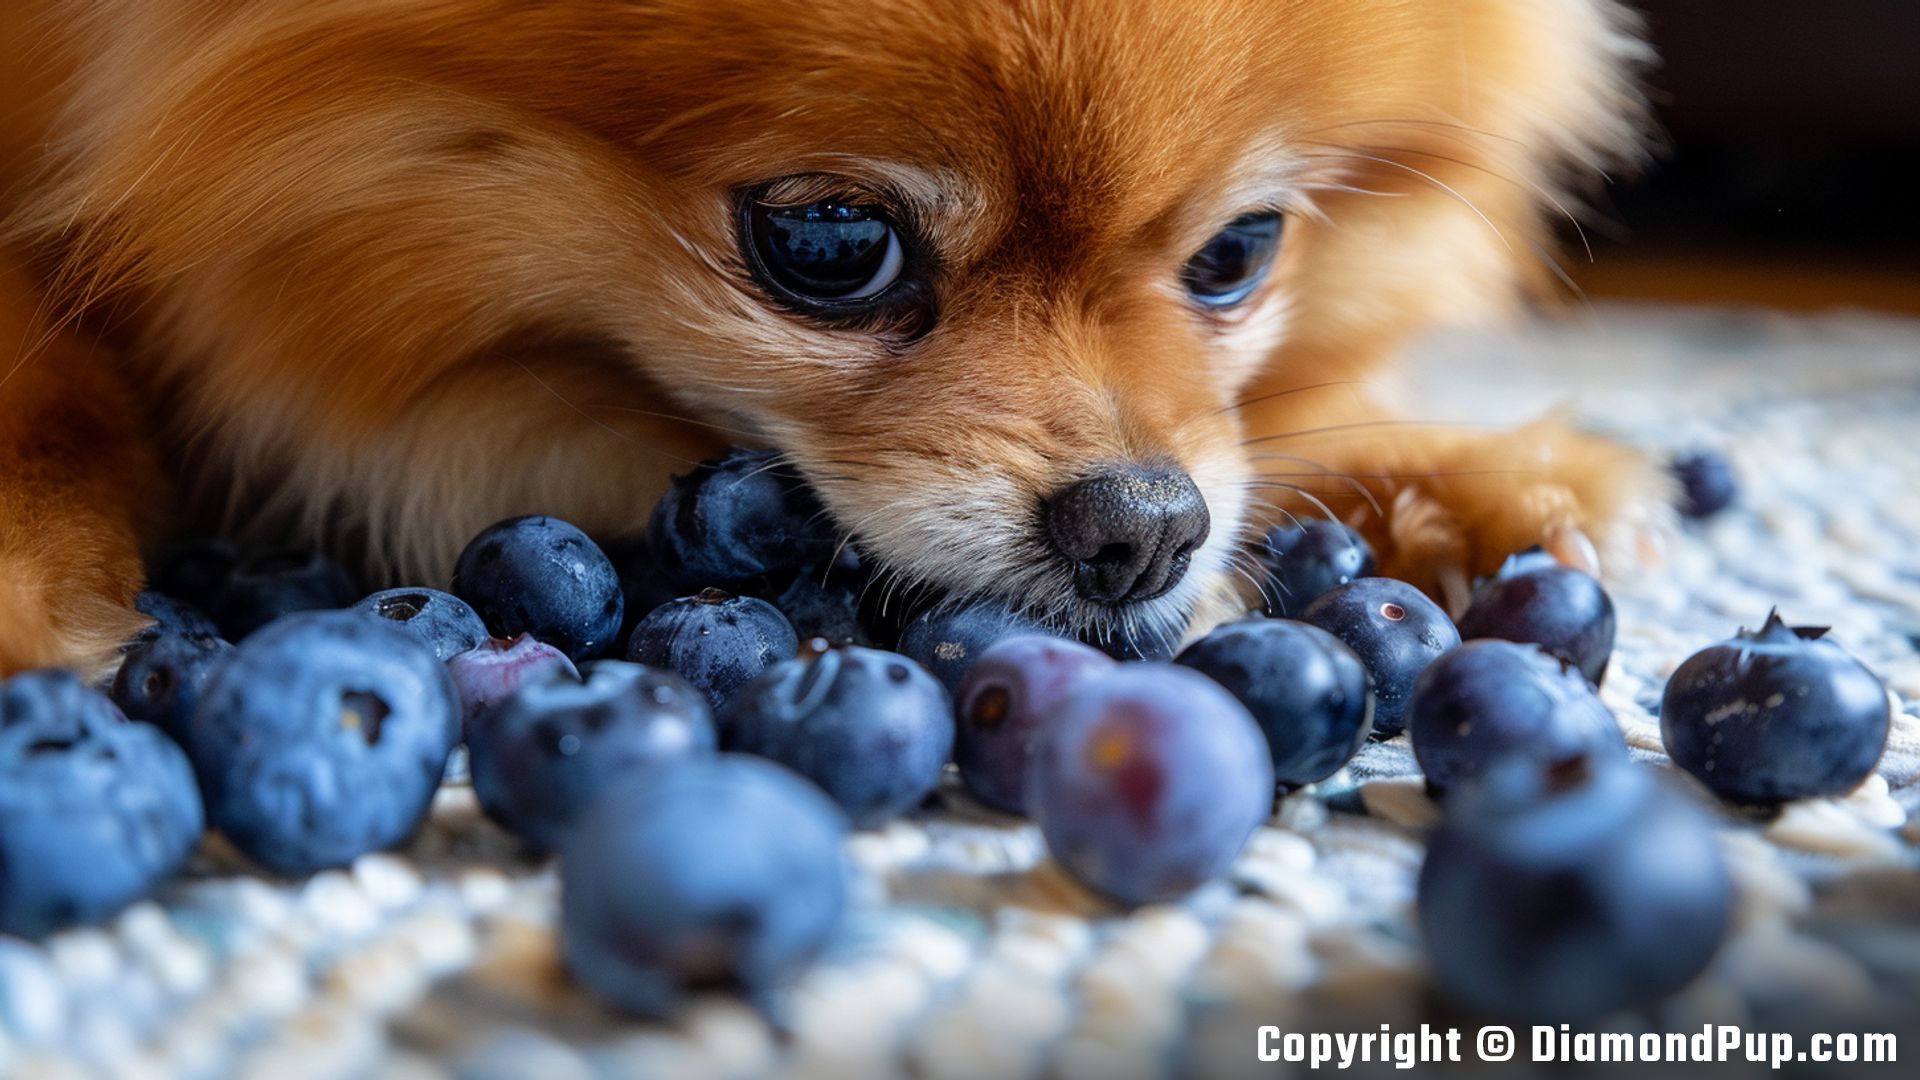 Photograph of an Adorable Pomeranian Snacking on Blueberries